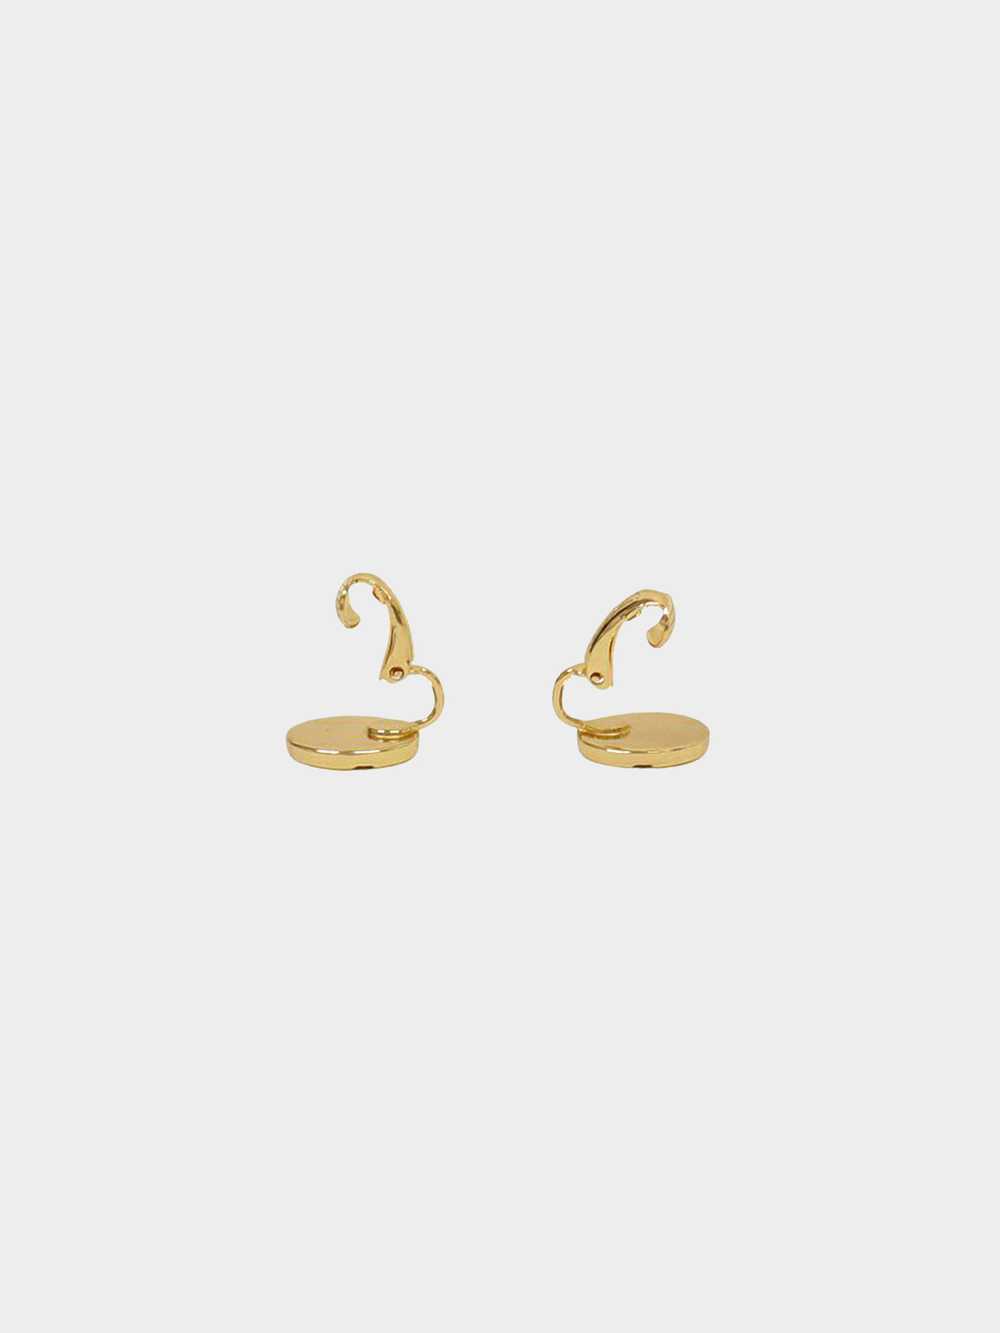 Christian Dior 1990s Round Clip-On Earrings - image 3